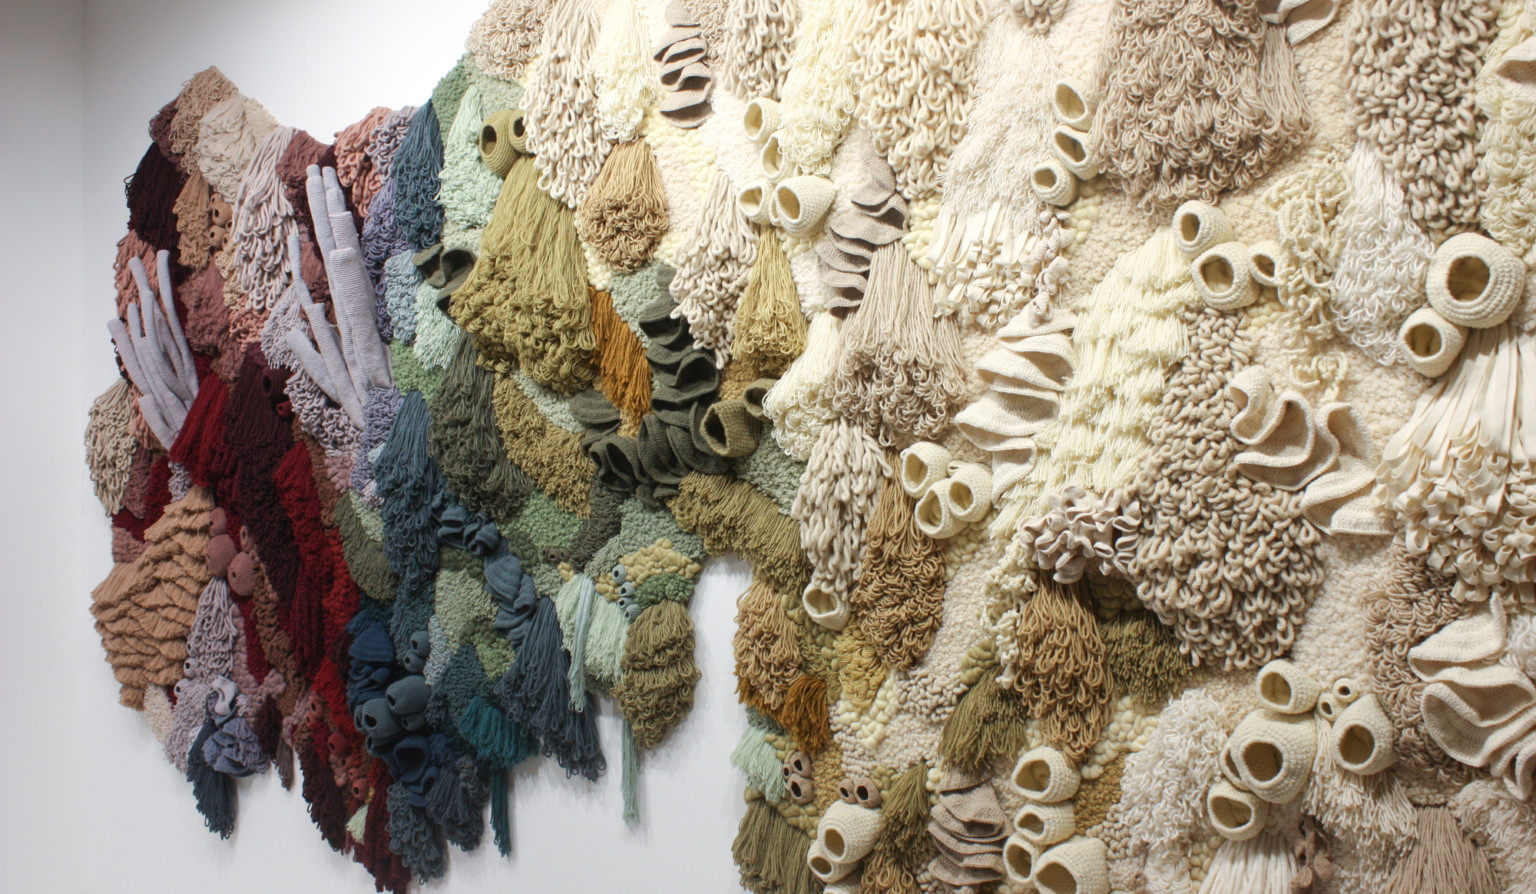 Stills from "Coral Garden," Vanessa Barragão's new art project made entirely from textile waste. 